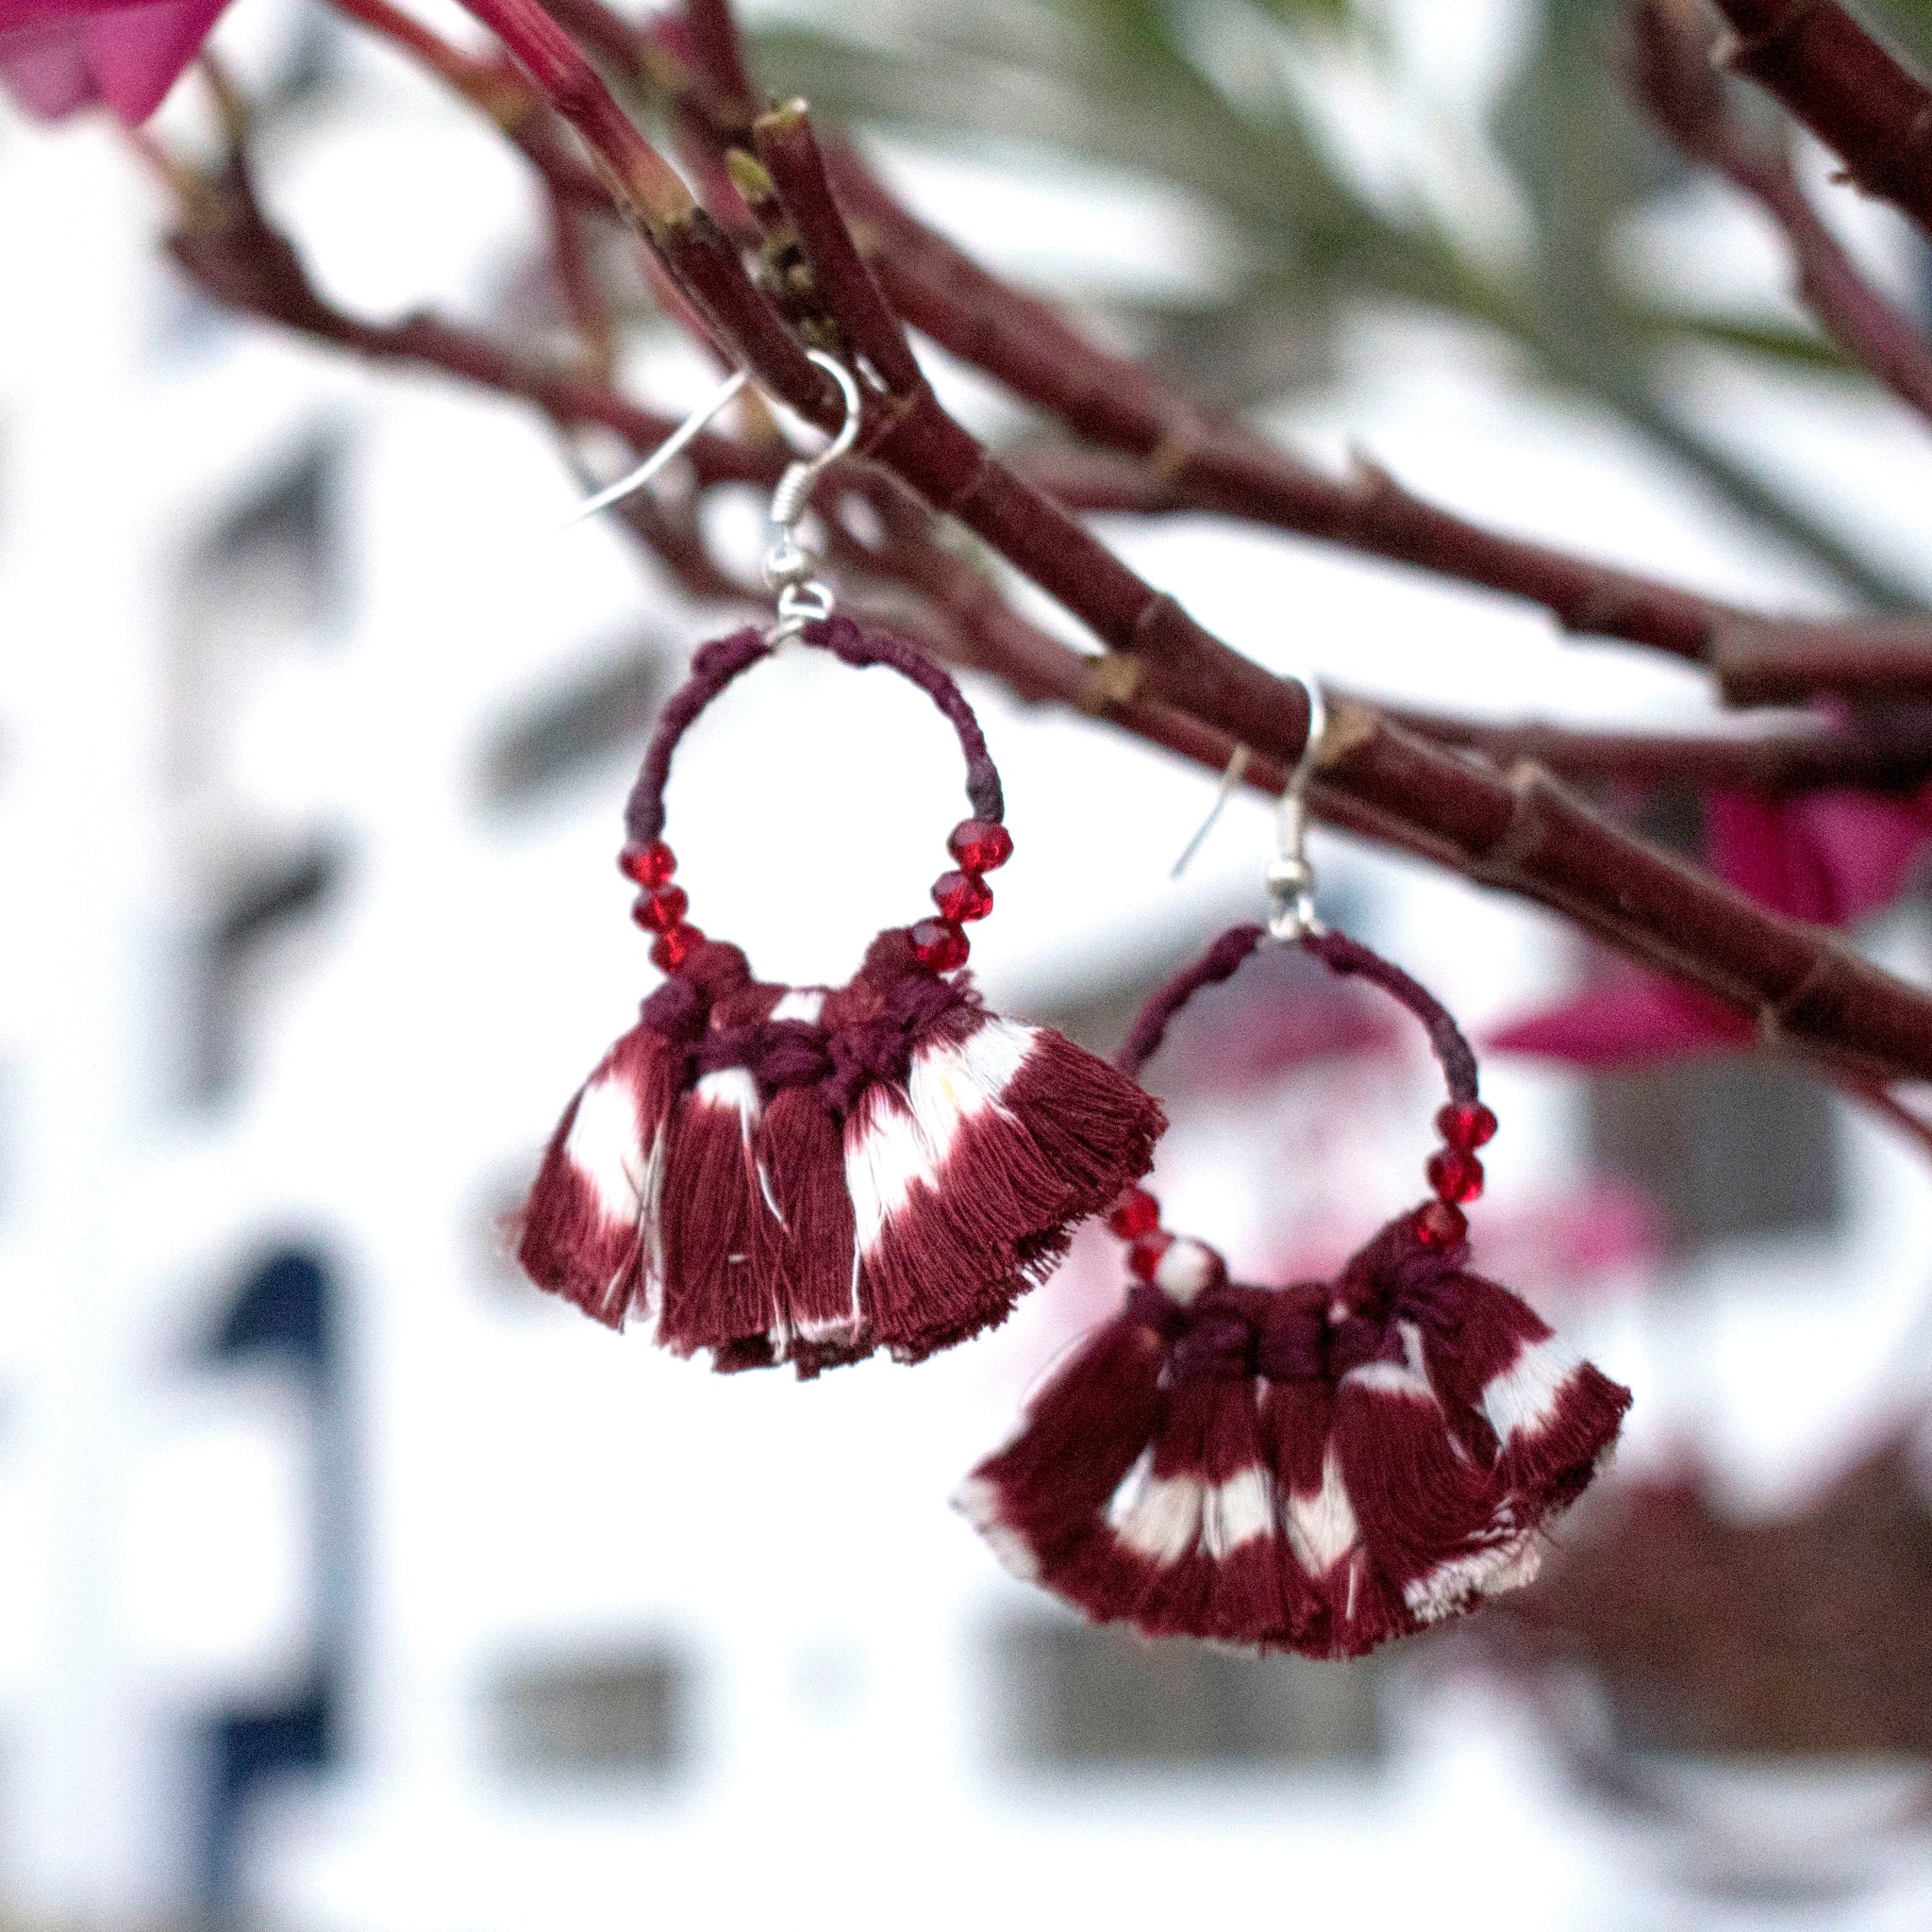 Earrings embellished with maroon ikat tassels and glass beads